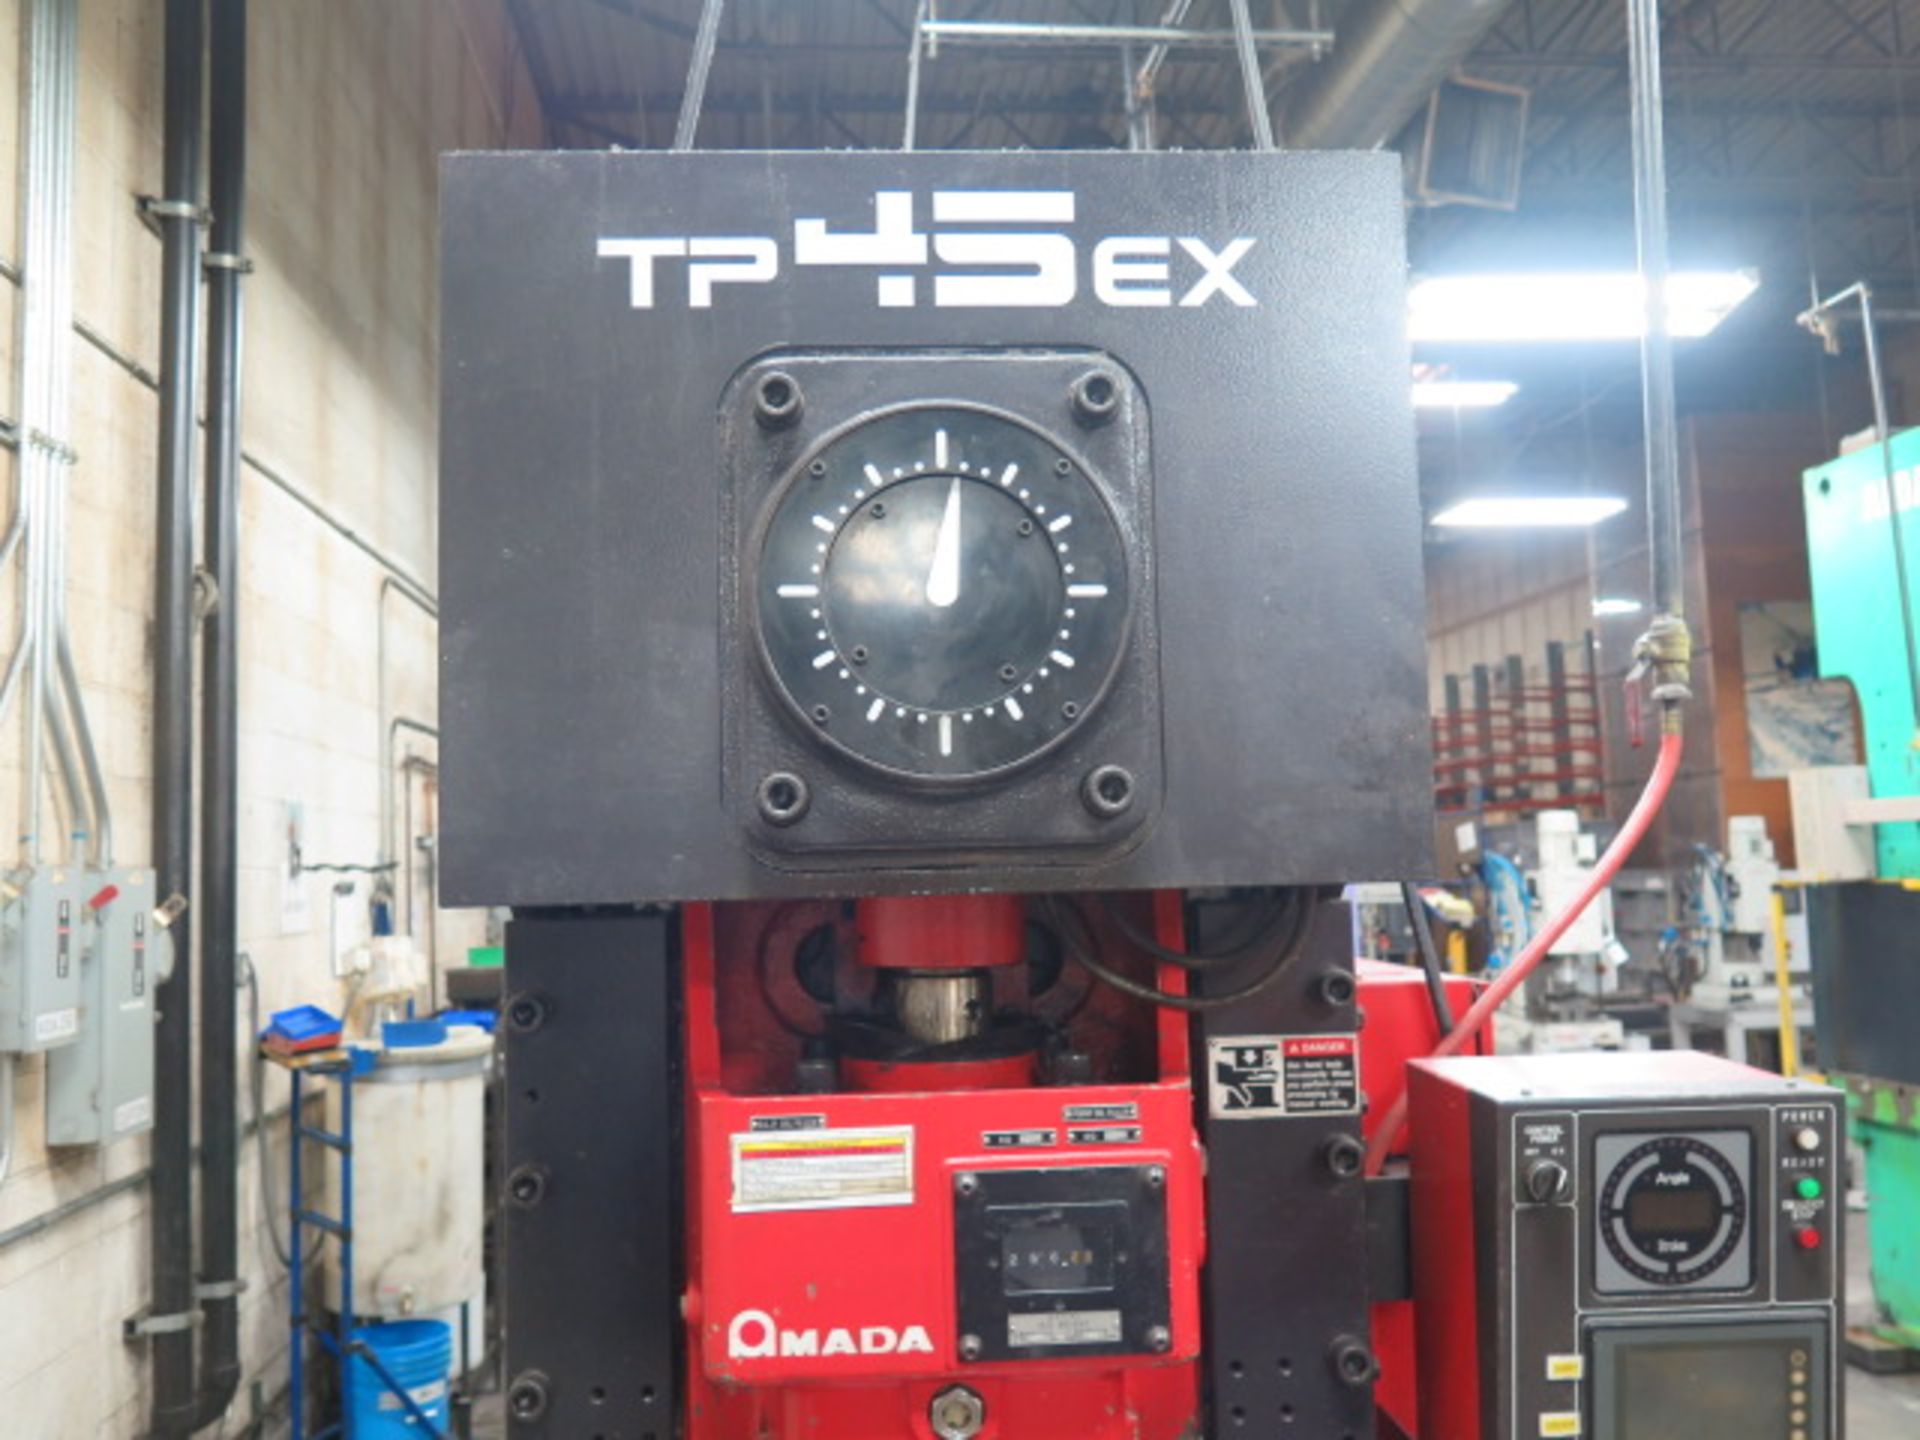 2006 Amada TP45EX 45 Metric Ton (49.5 Short Ton) Hydraulic Press s/n 72100691 SOLD AS IS - Image 6 of 14